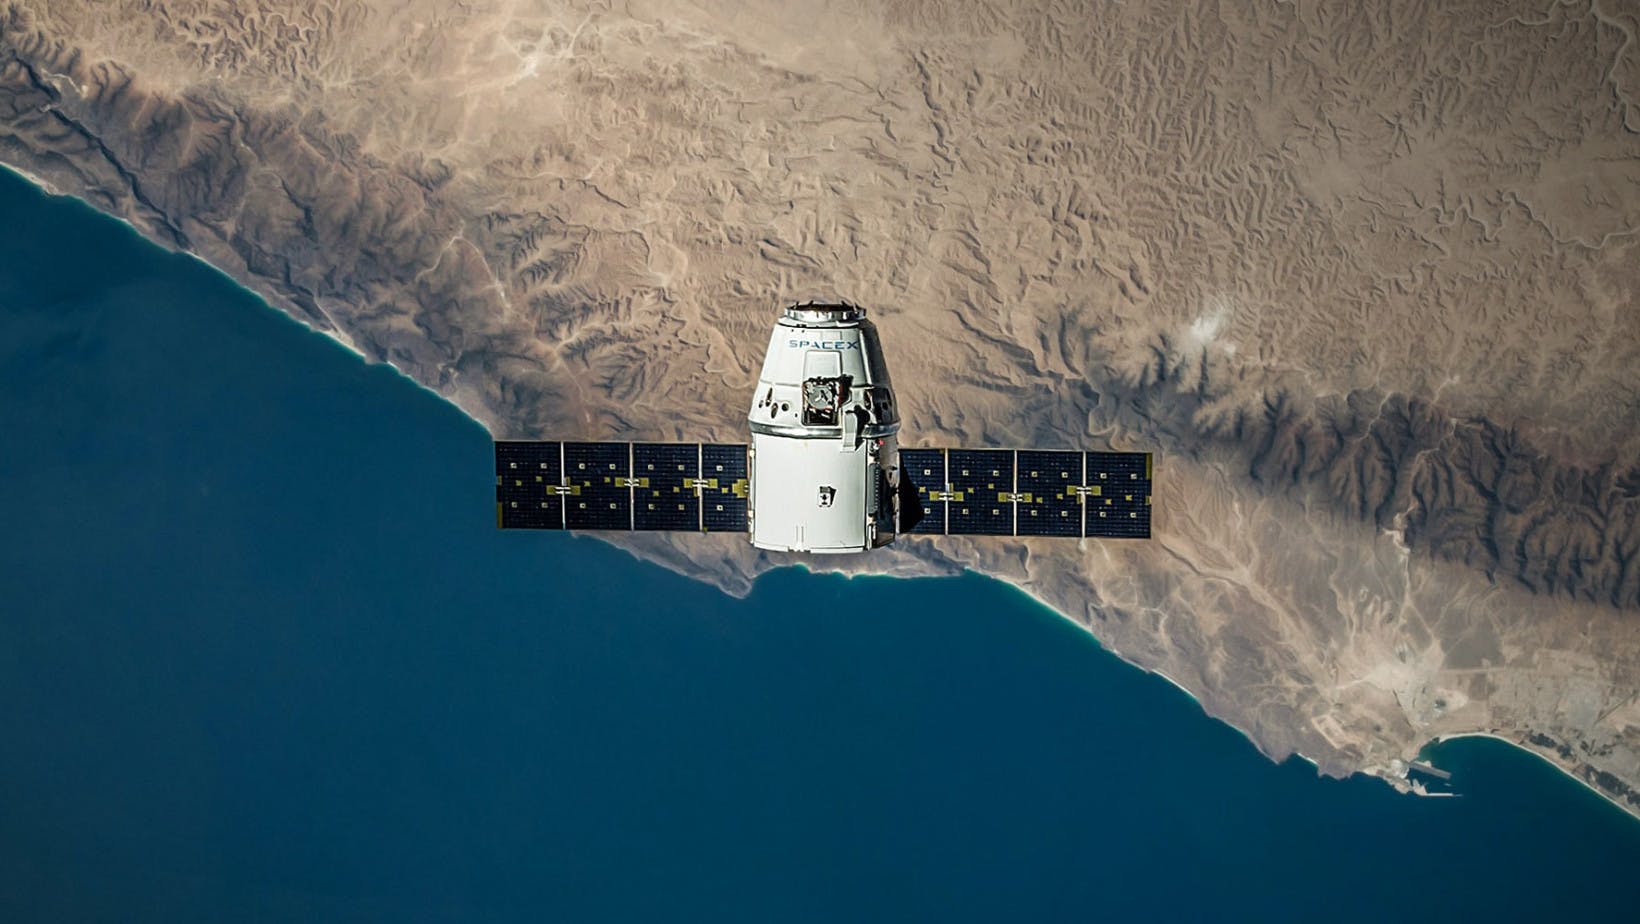 A spacecraft seen from above with coastline and water visible far in the distance beneath.